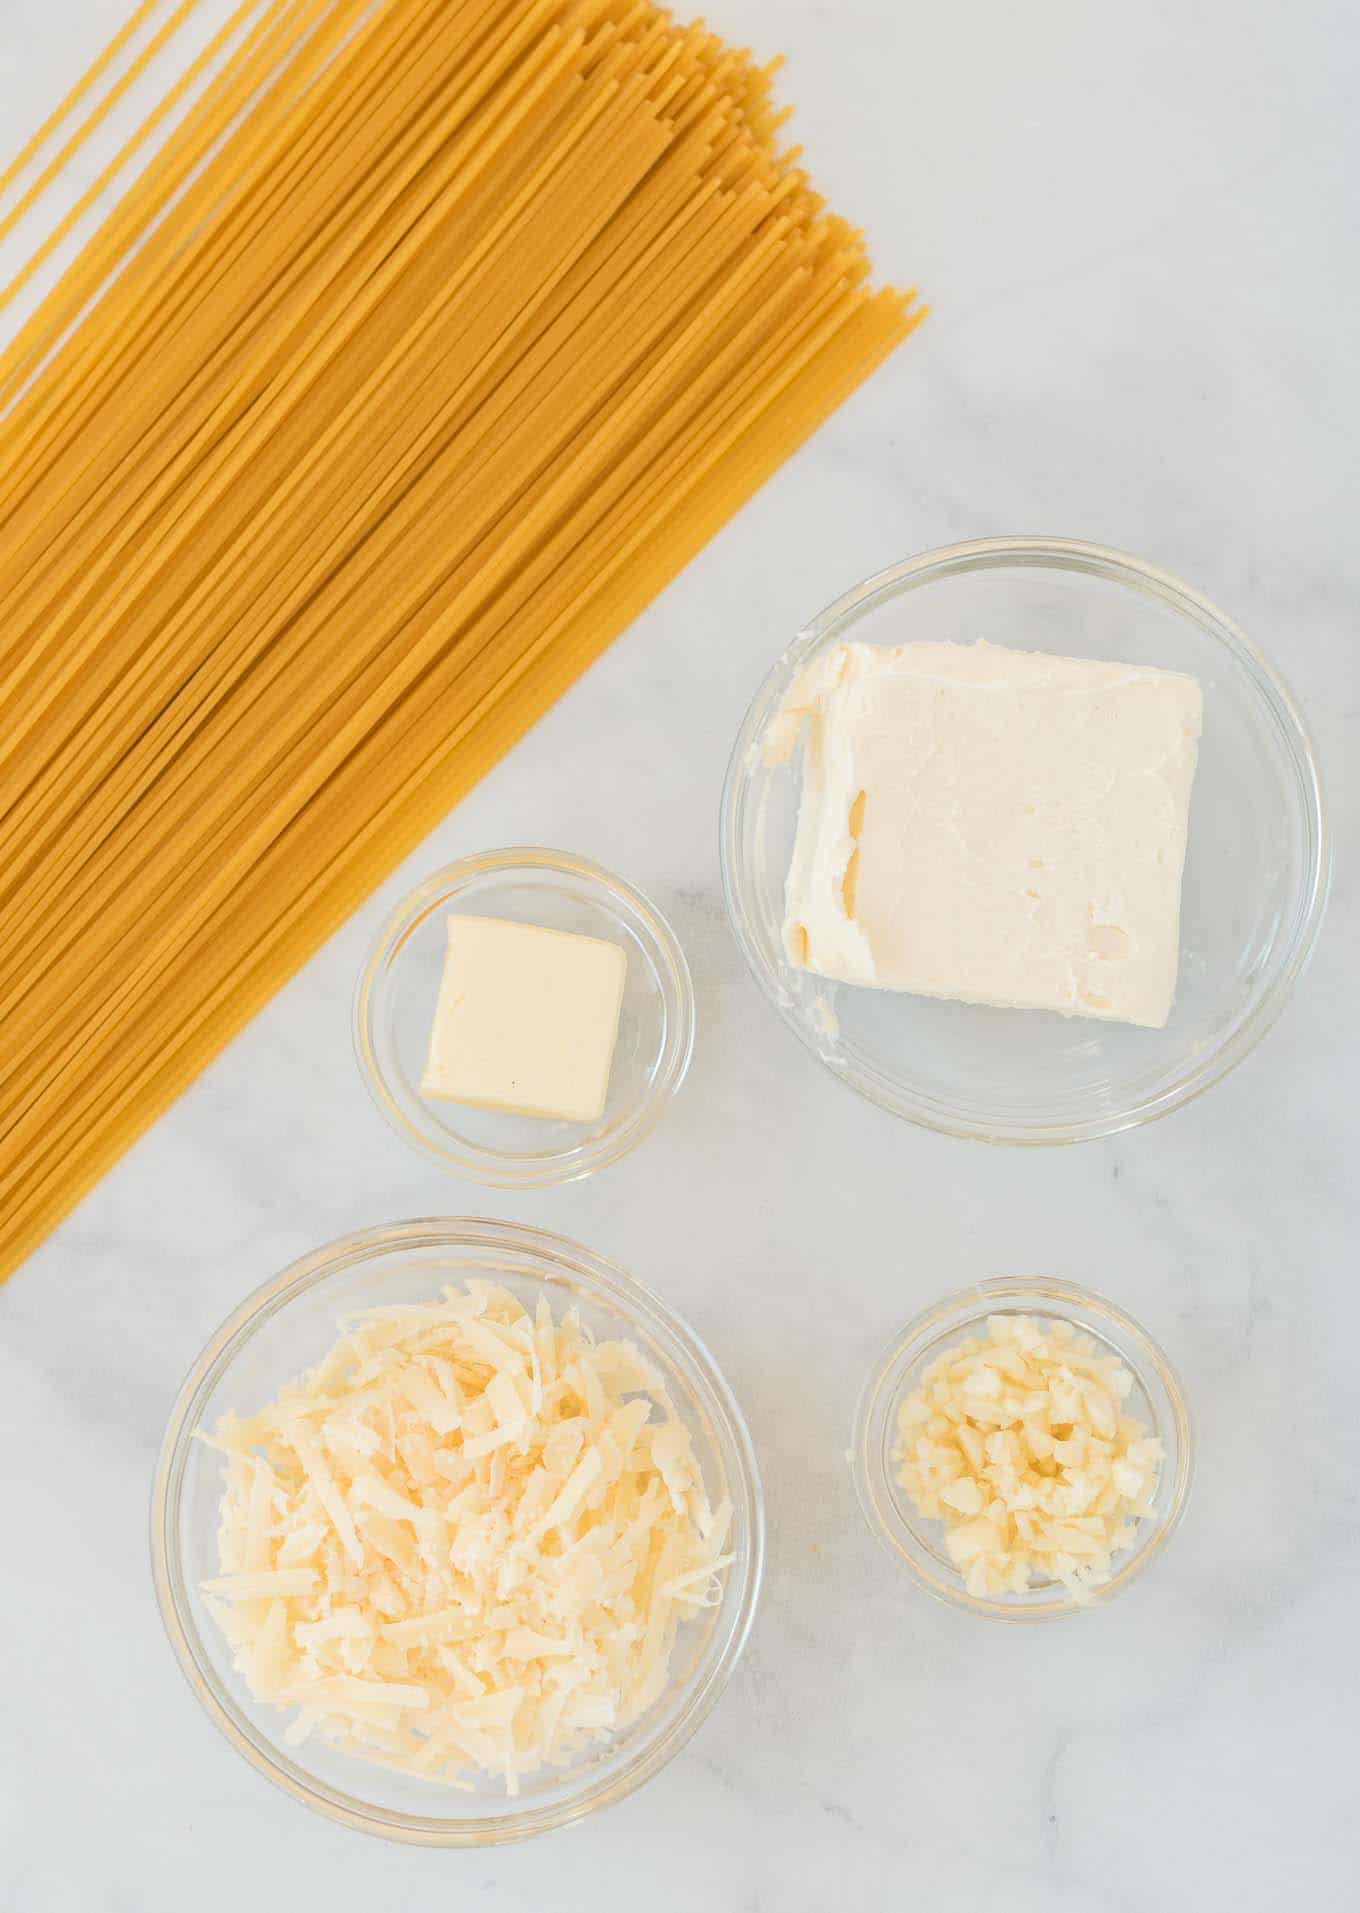 ingredients laid out - spaghetti noodles, butter, garlic, cream cheese, and parmesan